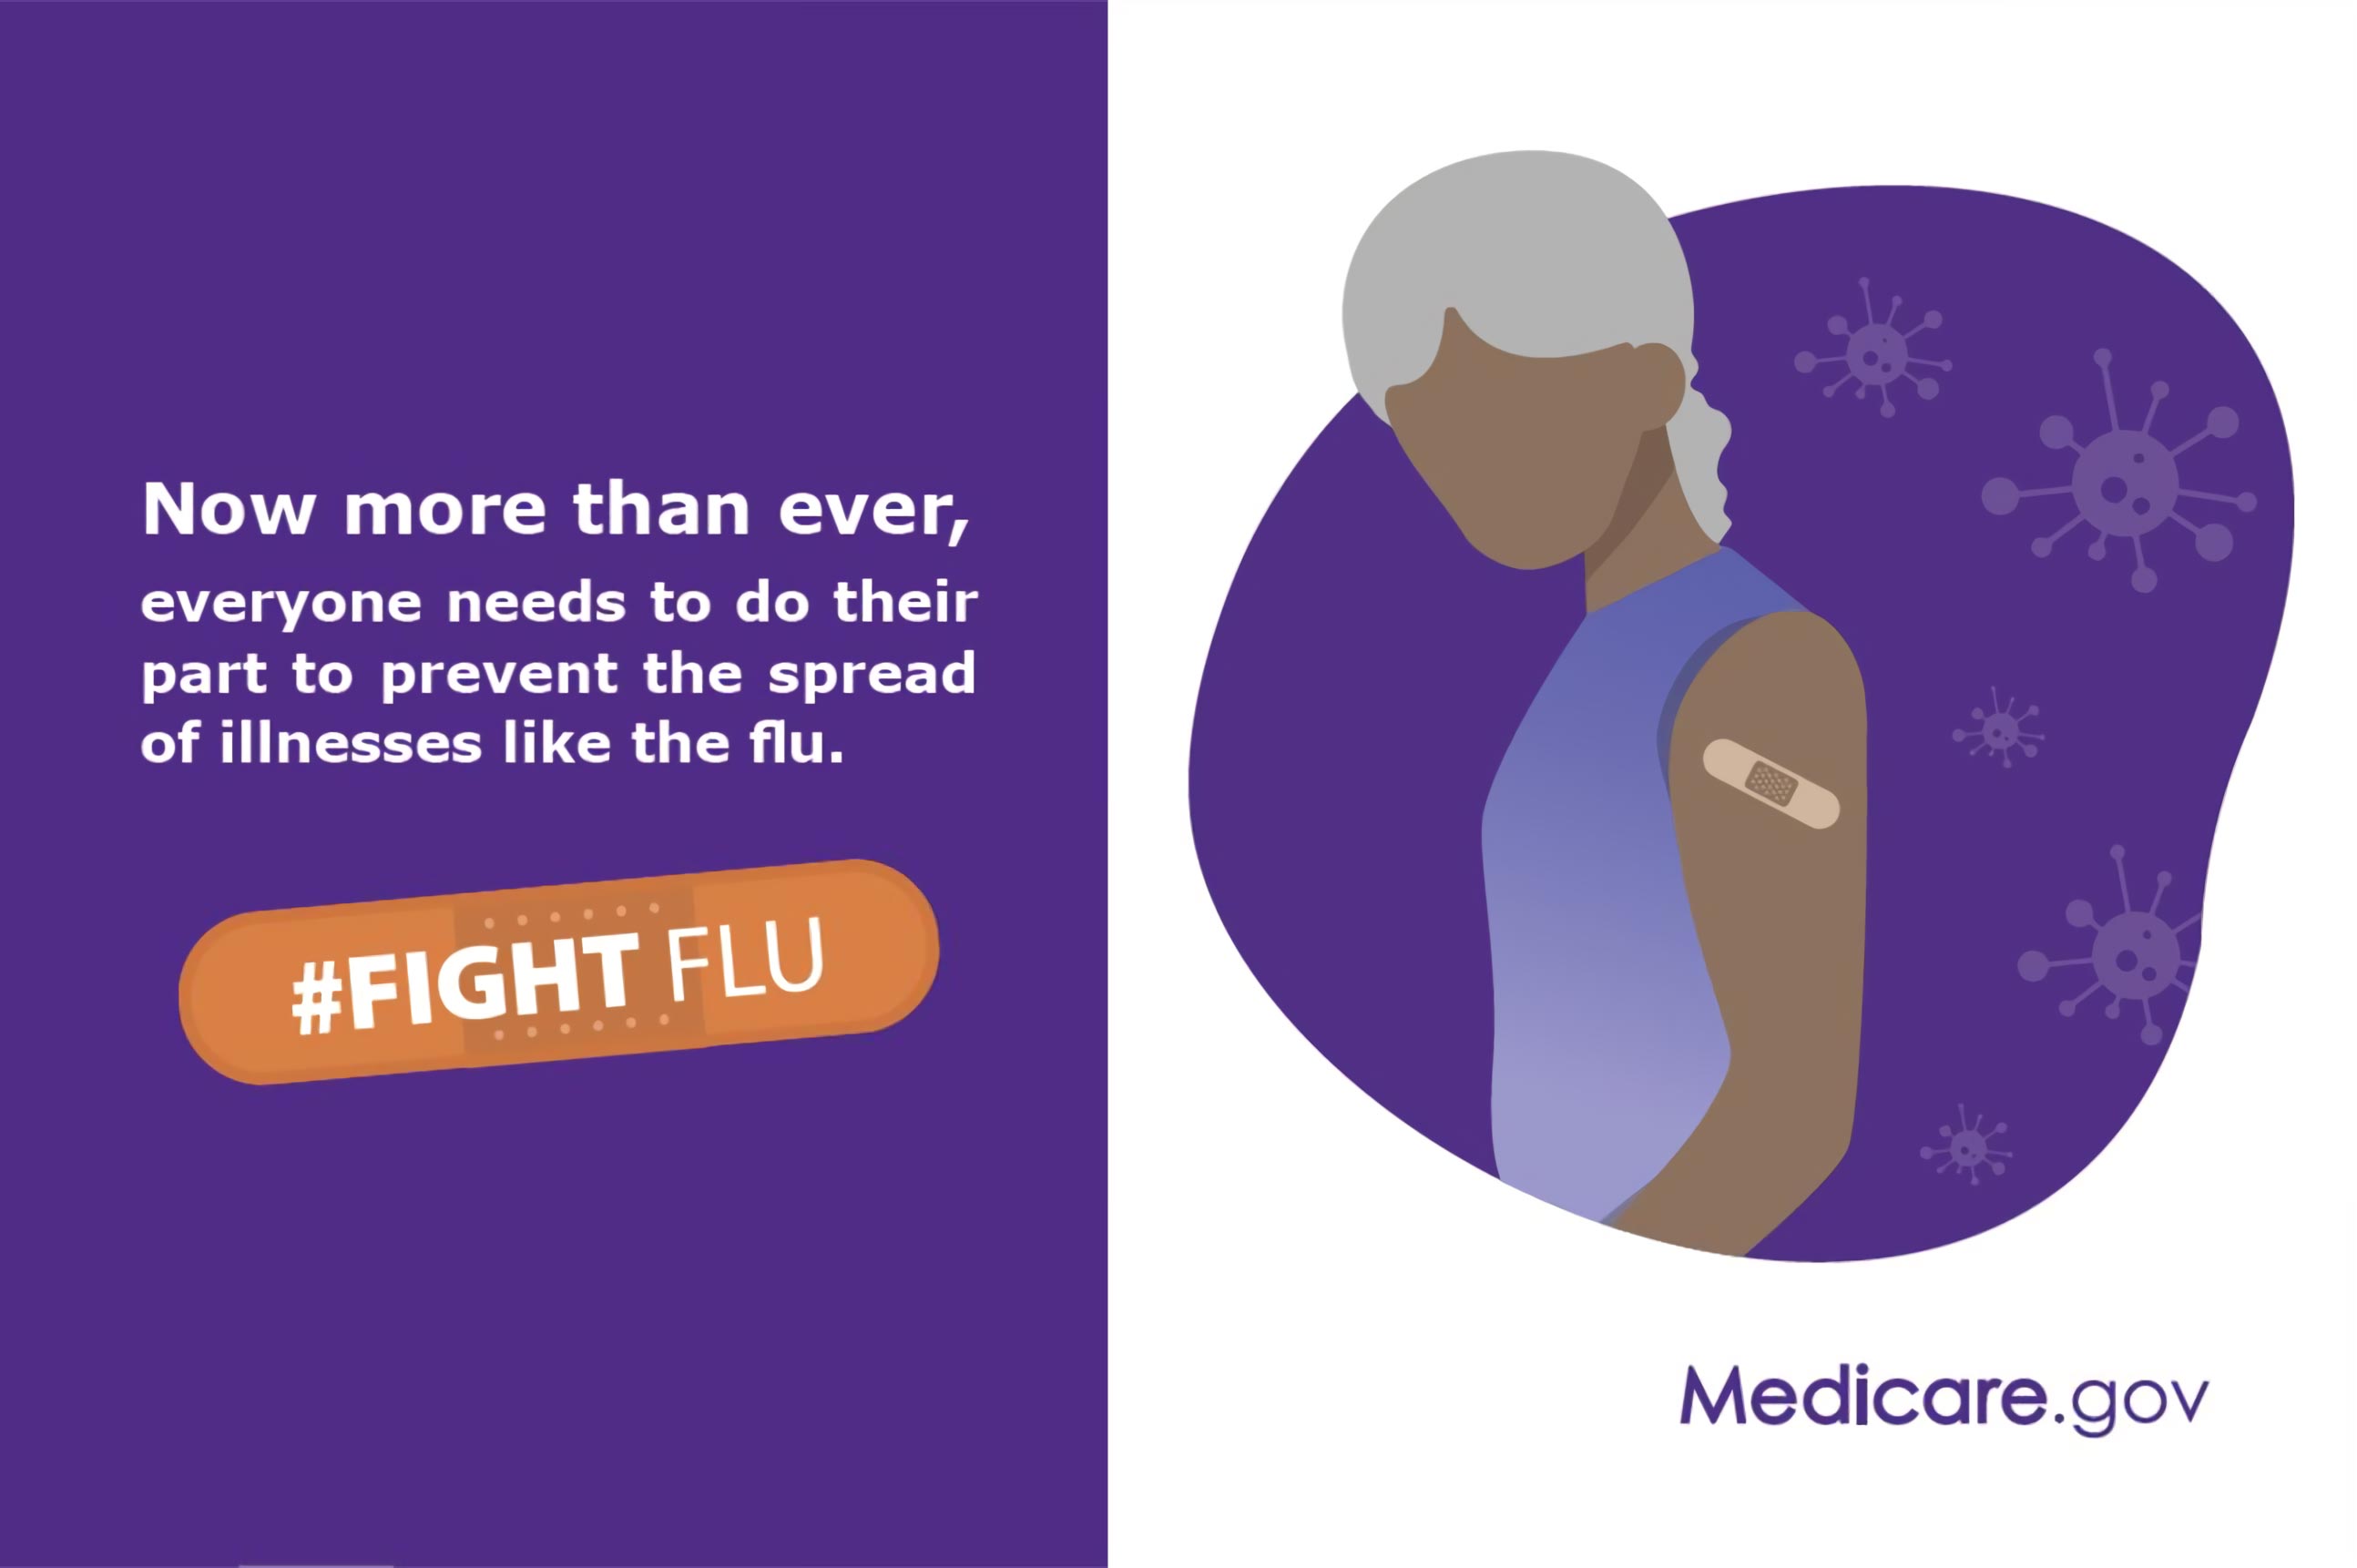 Now more than ever, everyone needs to do their part ot prevent the spread of illnesses like the flu.  #FIGHT FLU  Medicare.gov